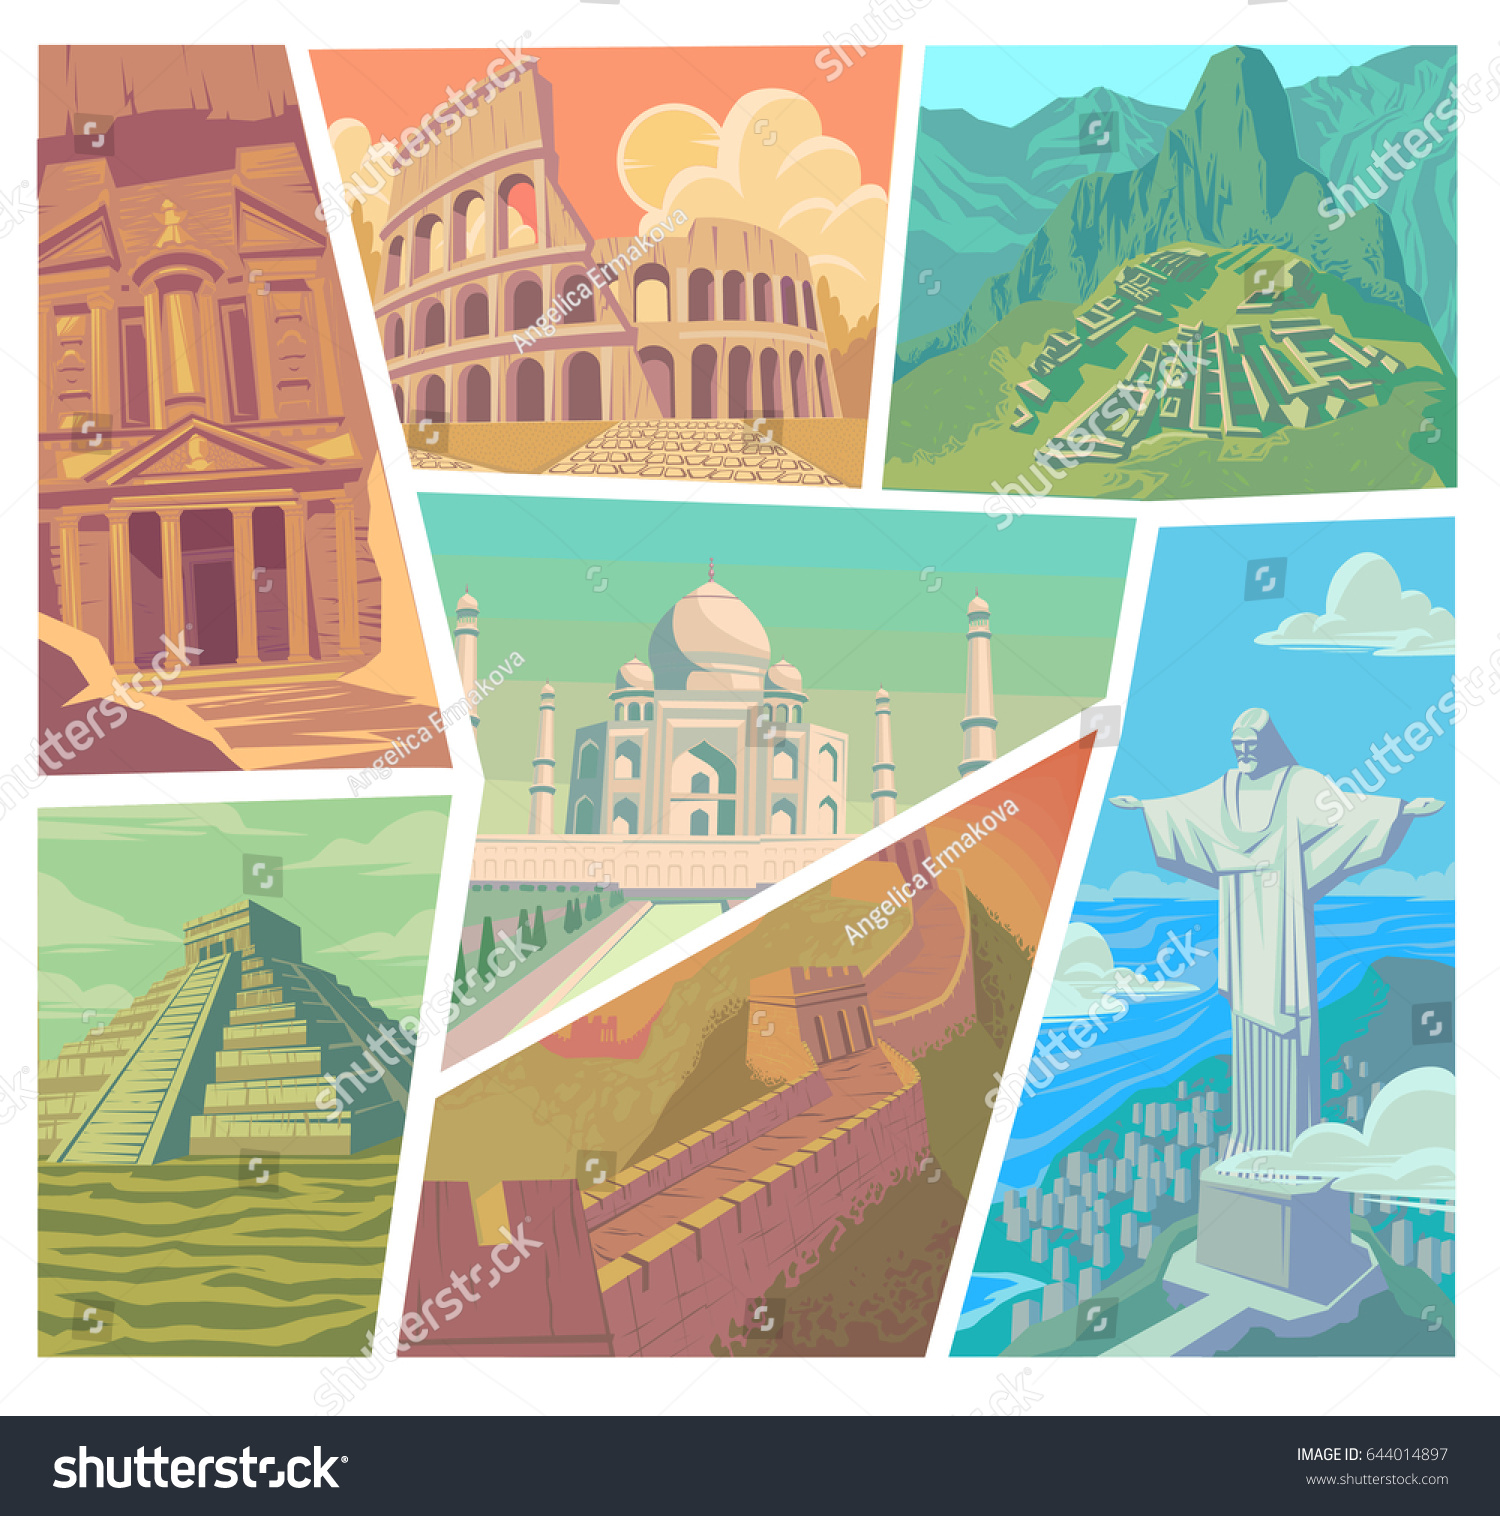 SVG of Seven wonders of the modern world vector illustration Great Wall of China Petra The Colosseum Chichen Itza Machu Picchu Taj Mahal Christ the Redeemer svg